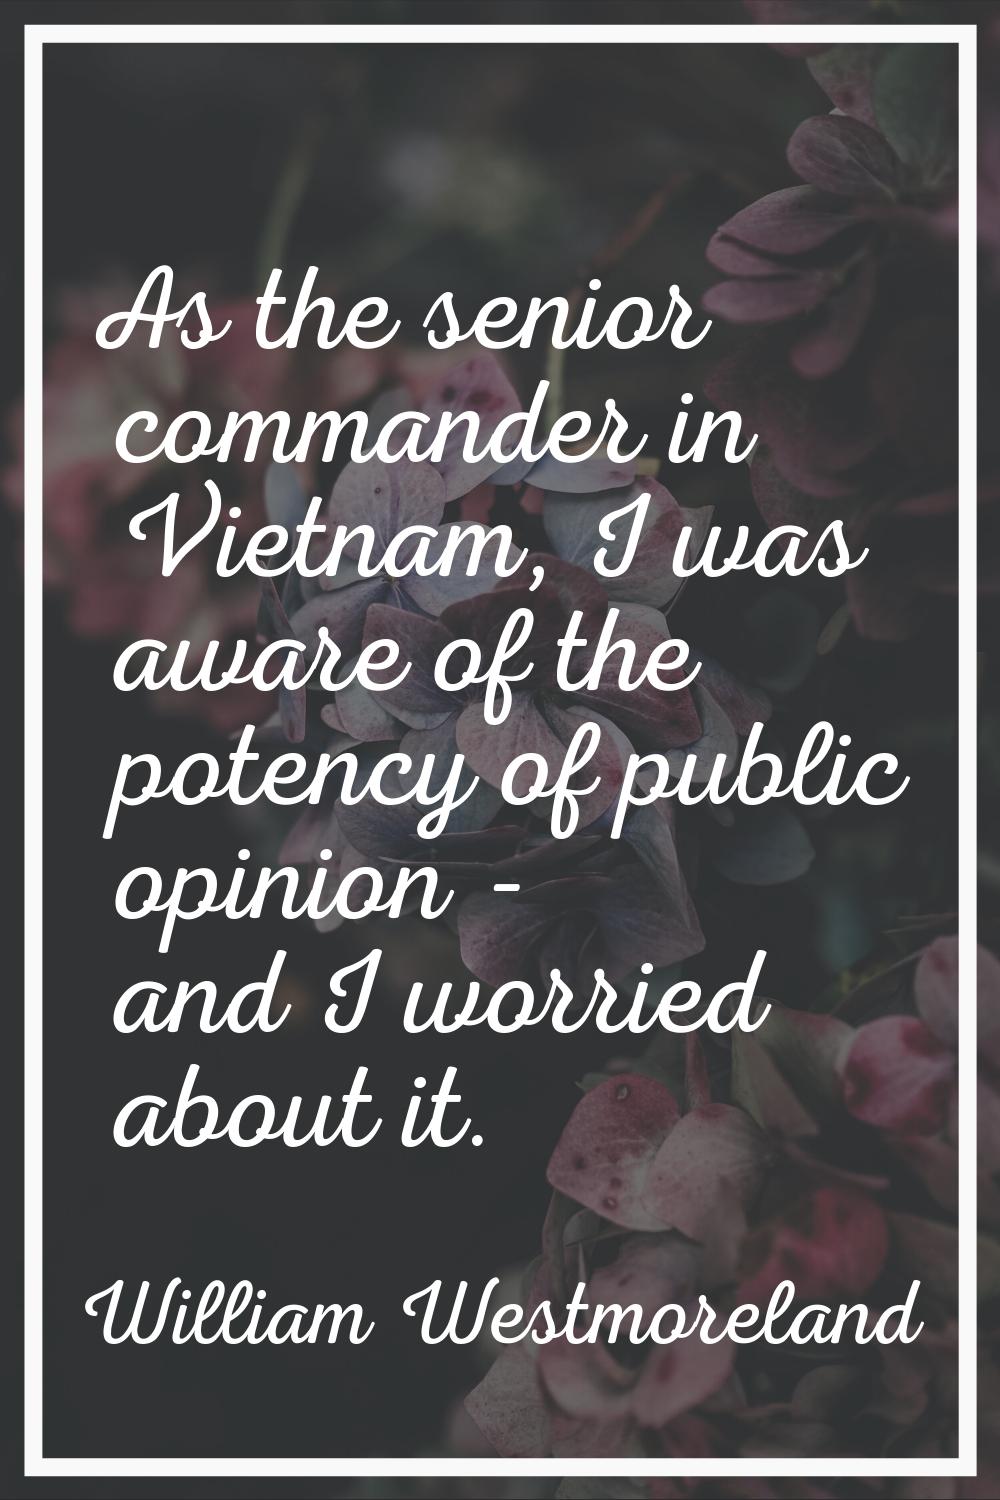 As the senior commander in Vietnam, I was aware of the potency of public opinion - and I worried ab